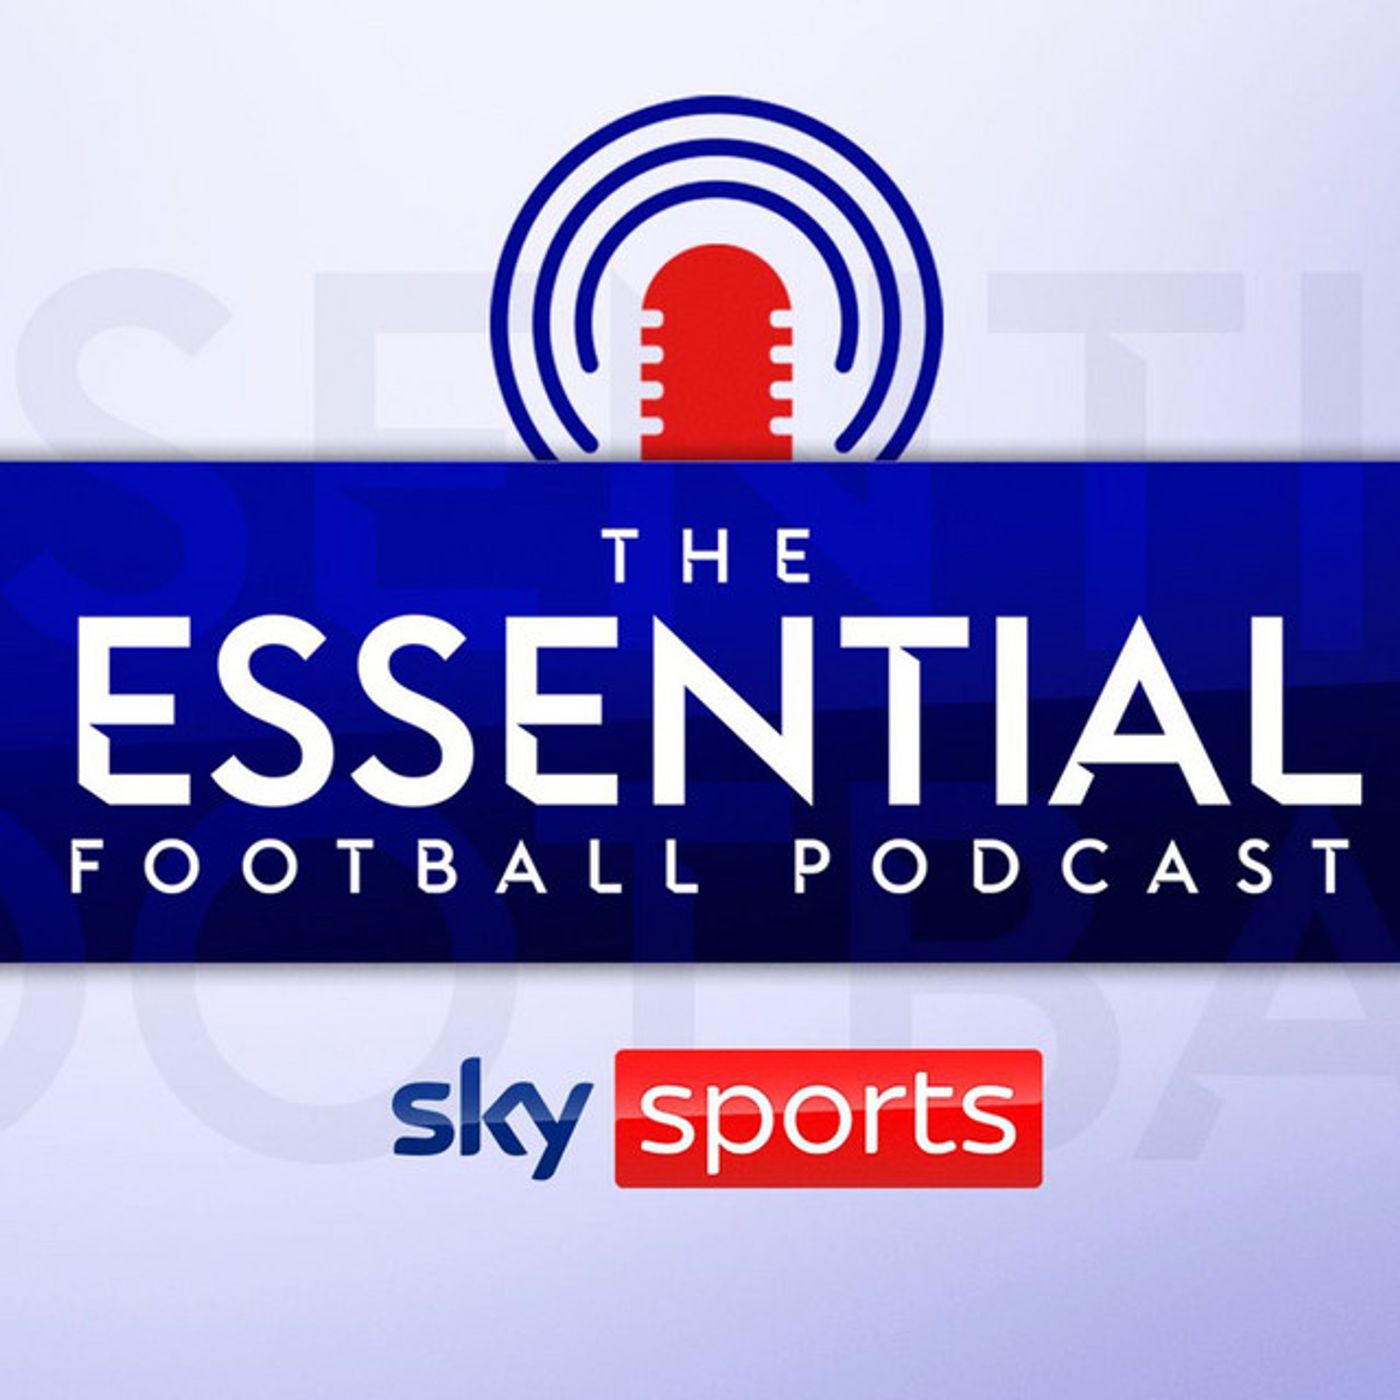 Essential Questions: Forest, Luton or Burnley? Who will avoid relegation?